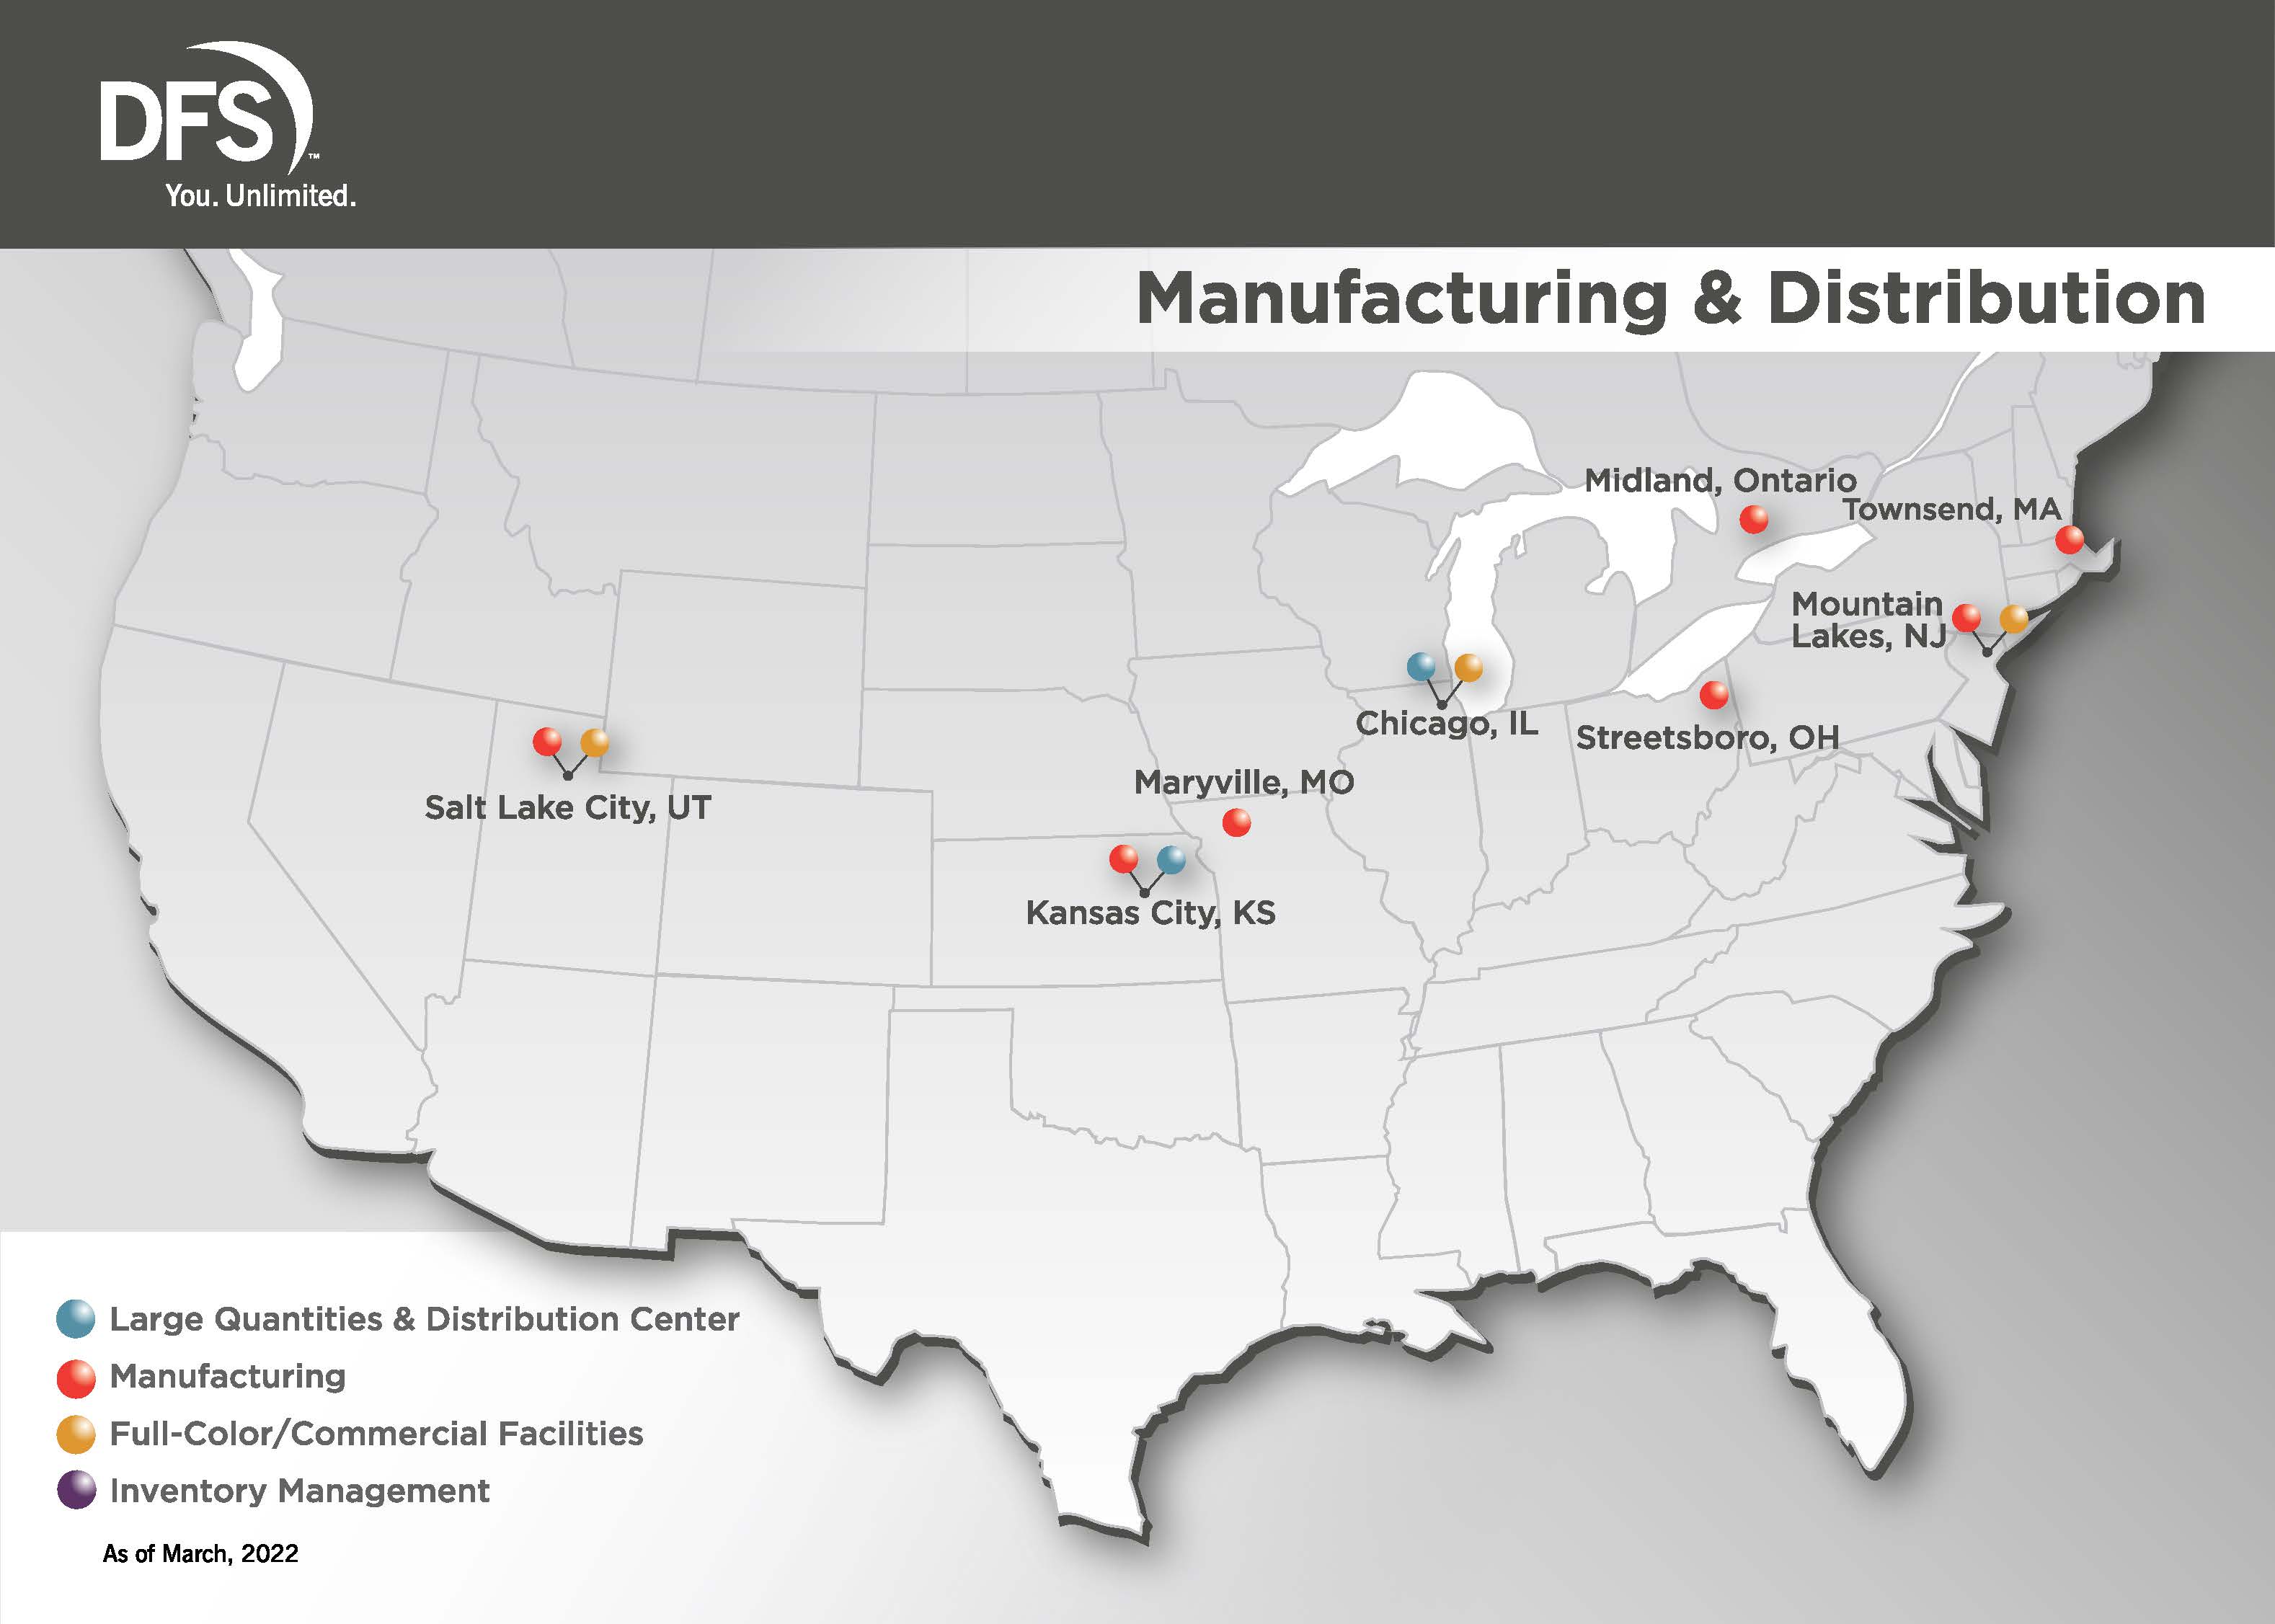 Map of manufacturing and distribution production facilities for DFS within the USA and Canada